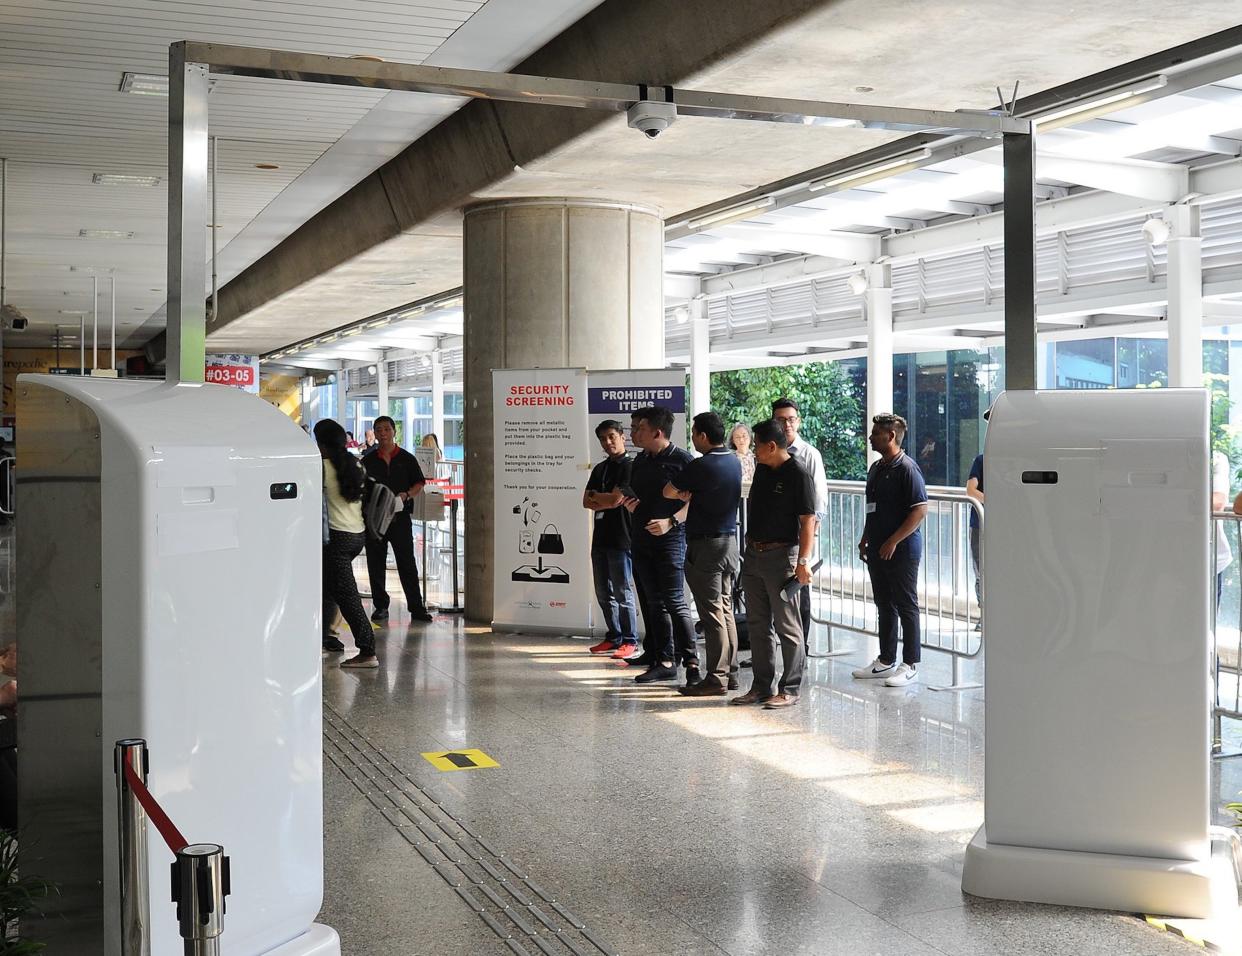 A new mass security screening equipment, called the Human Security Radar, was deployed by the Land Transport Authority for the first time at the Jurong East MRT interchange on 5 April, 2019. (PHOTO: Land Transport Authority/Facebook)